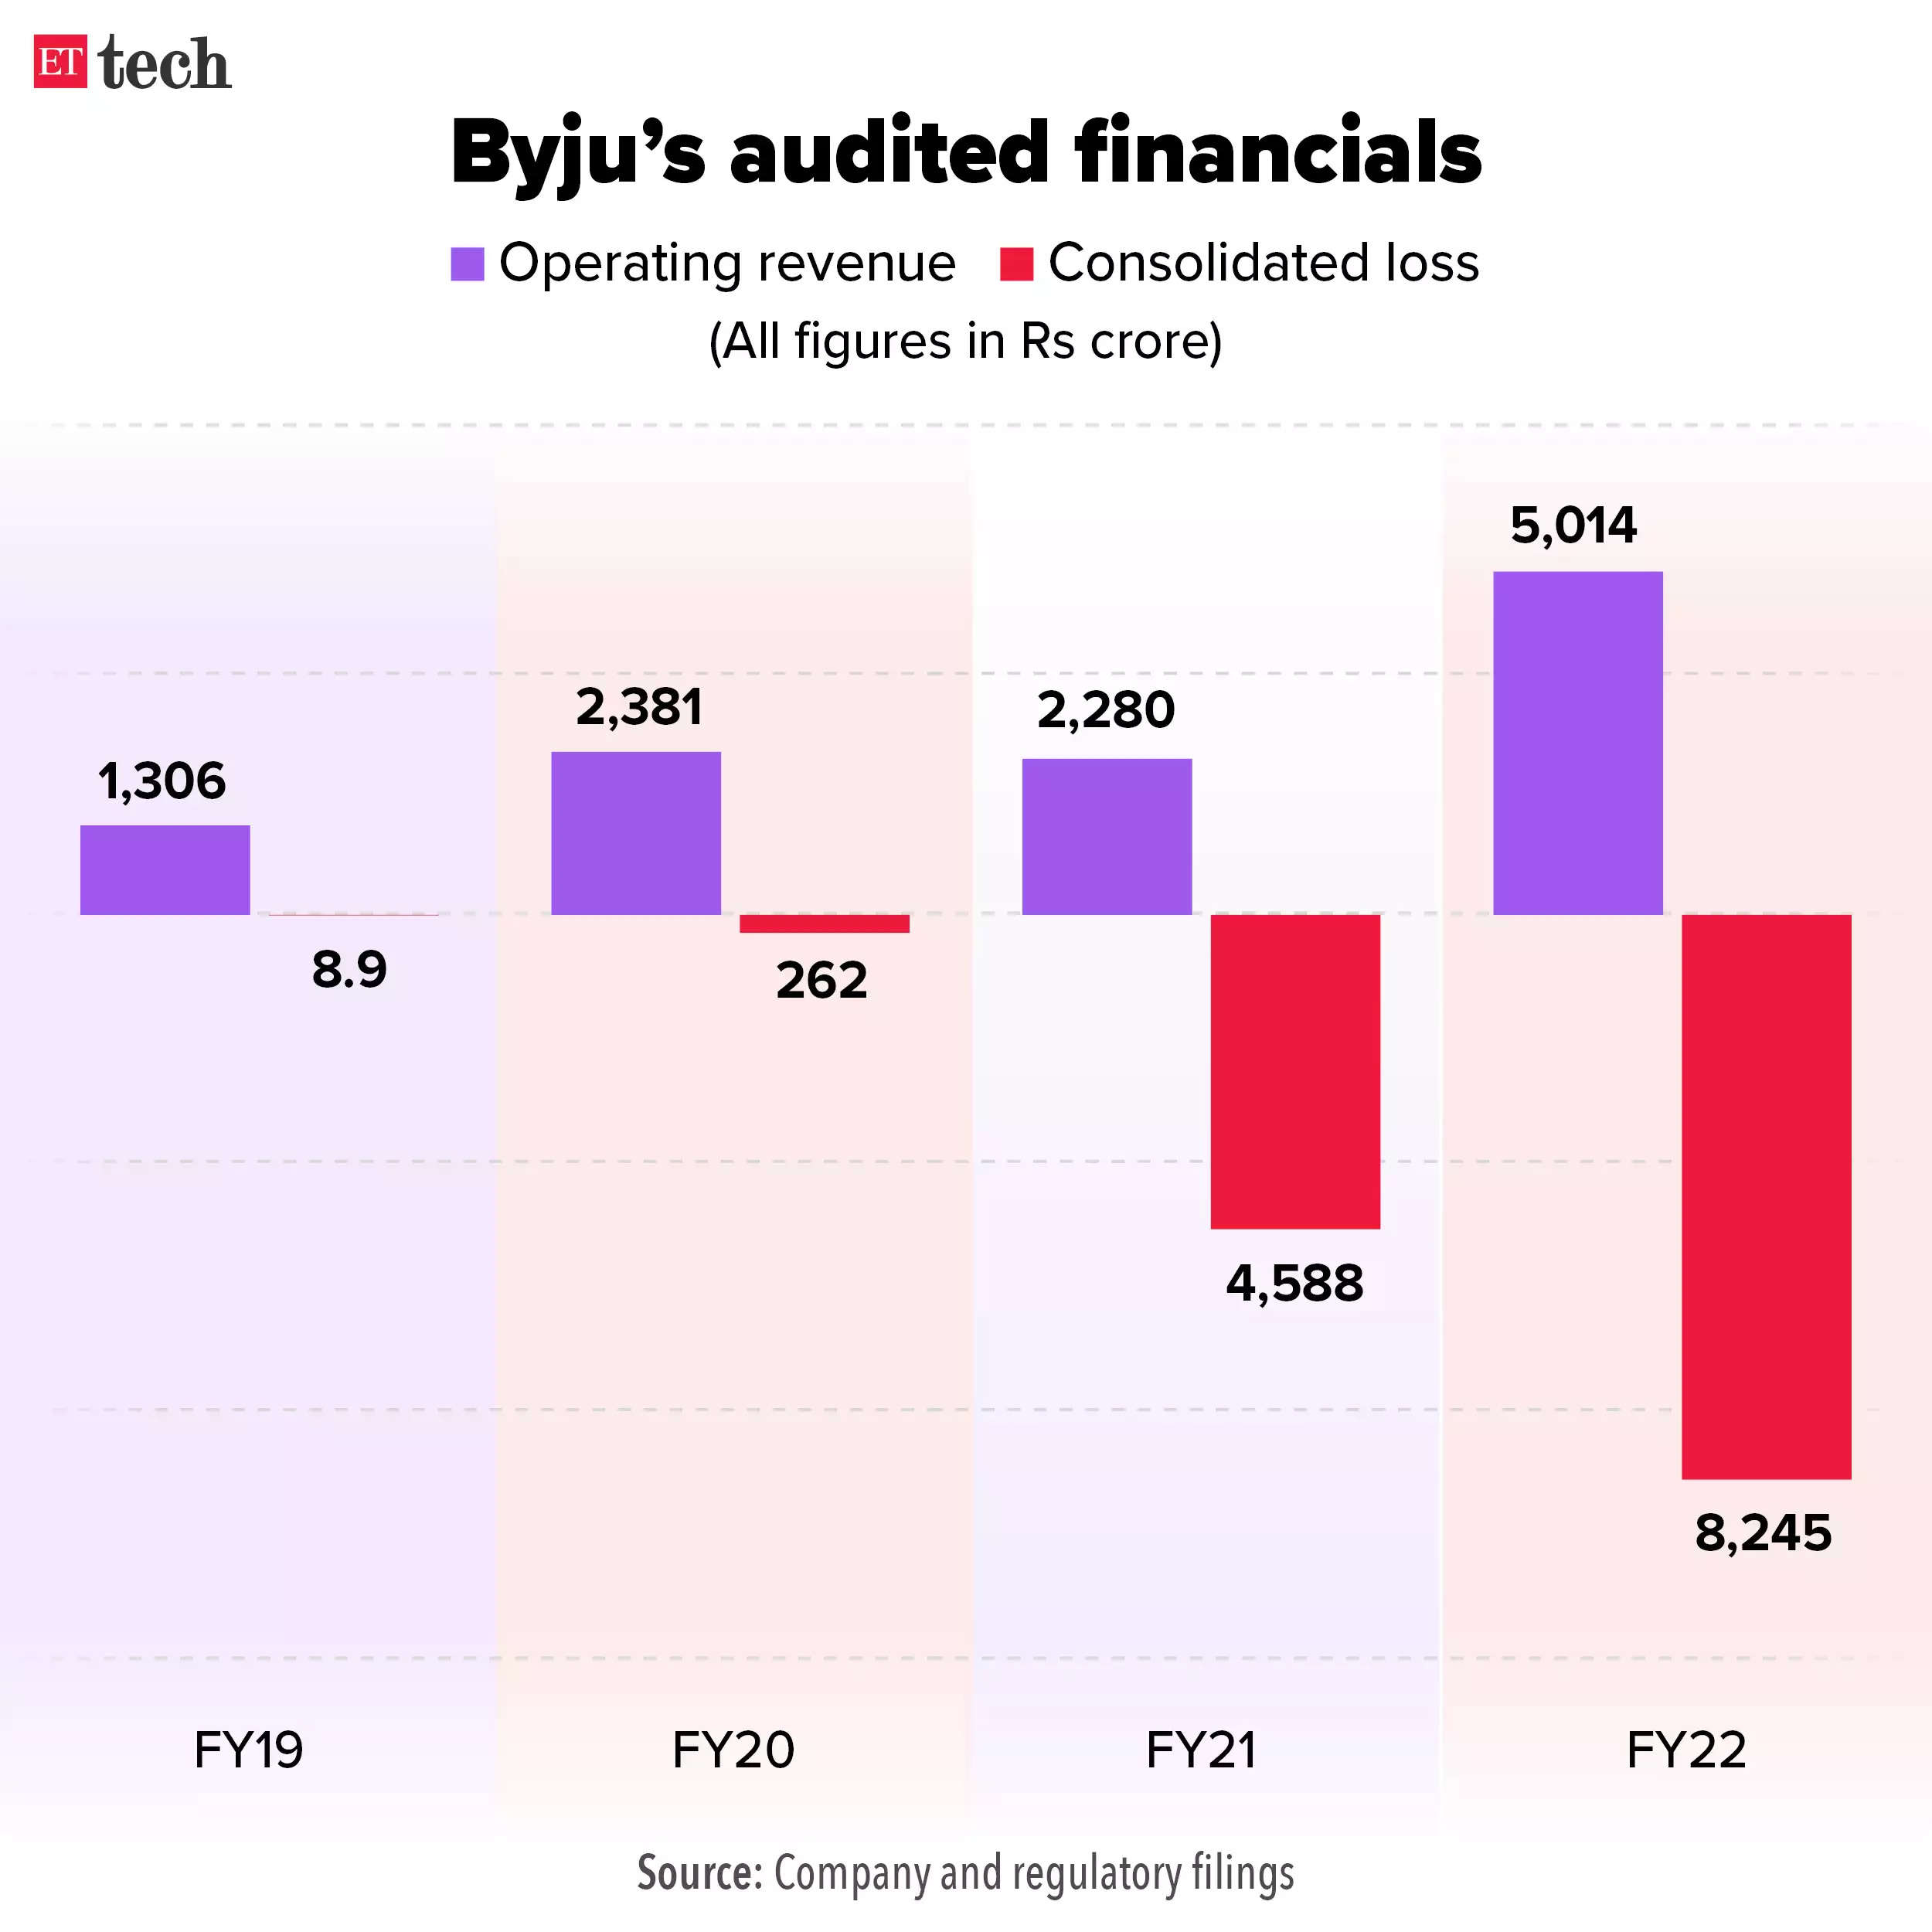 Byjus audited financials